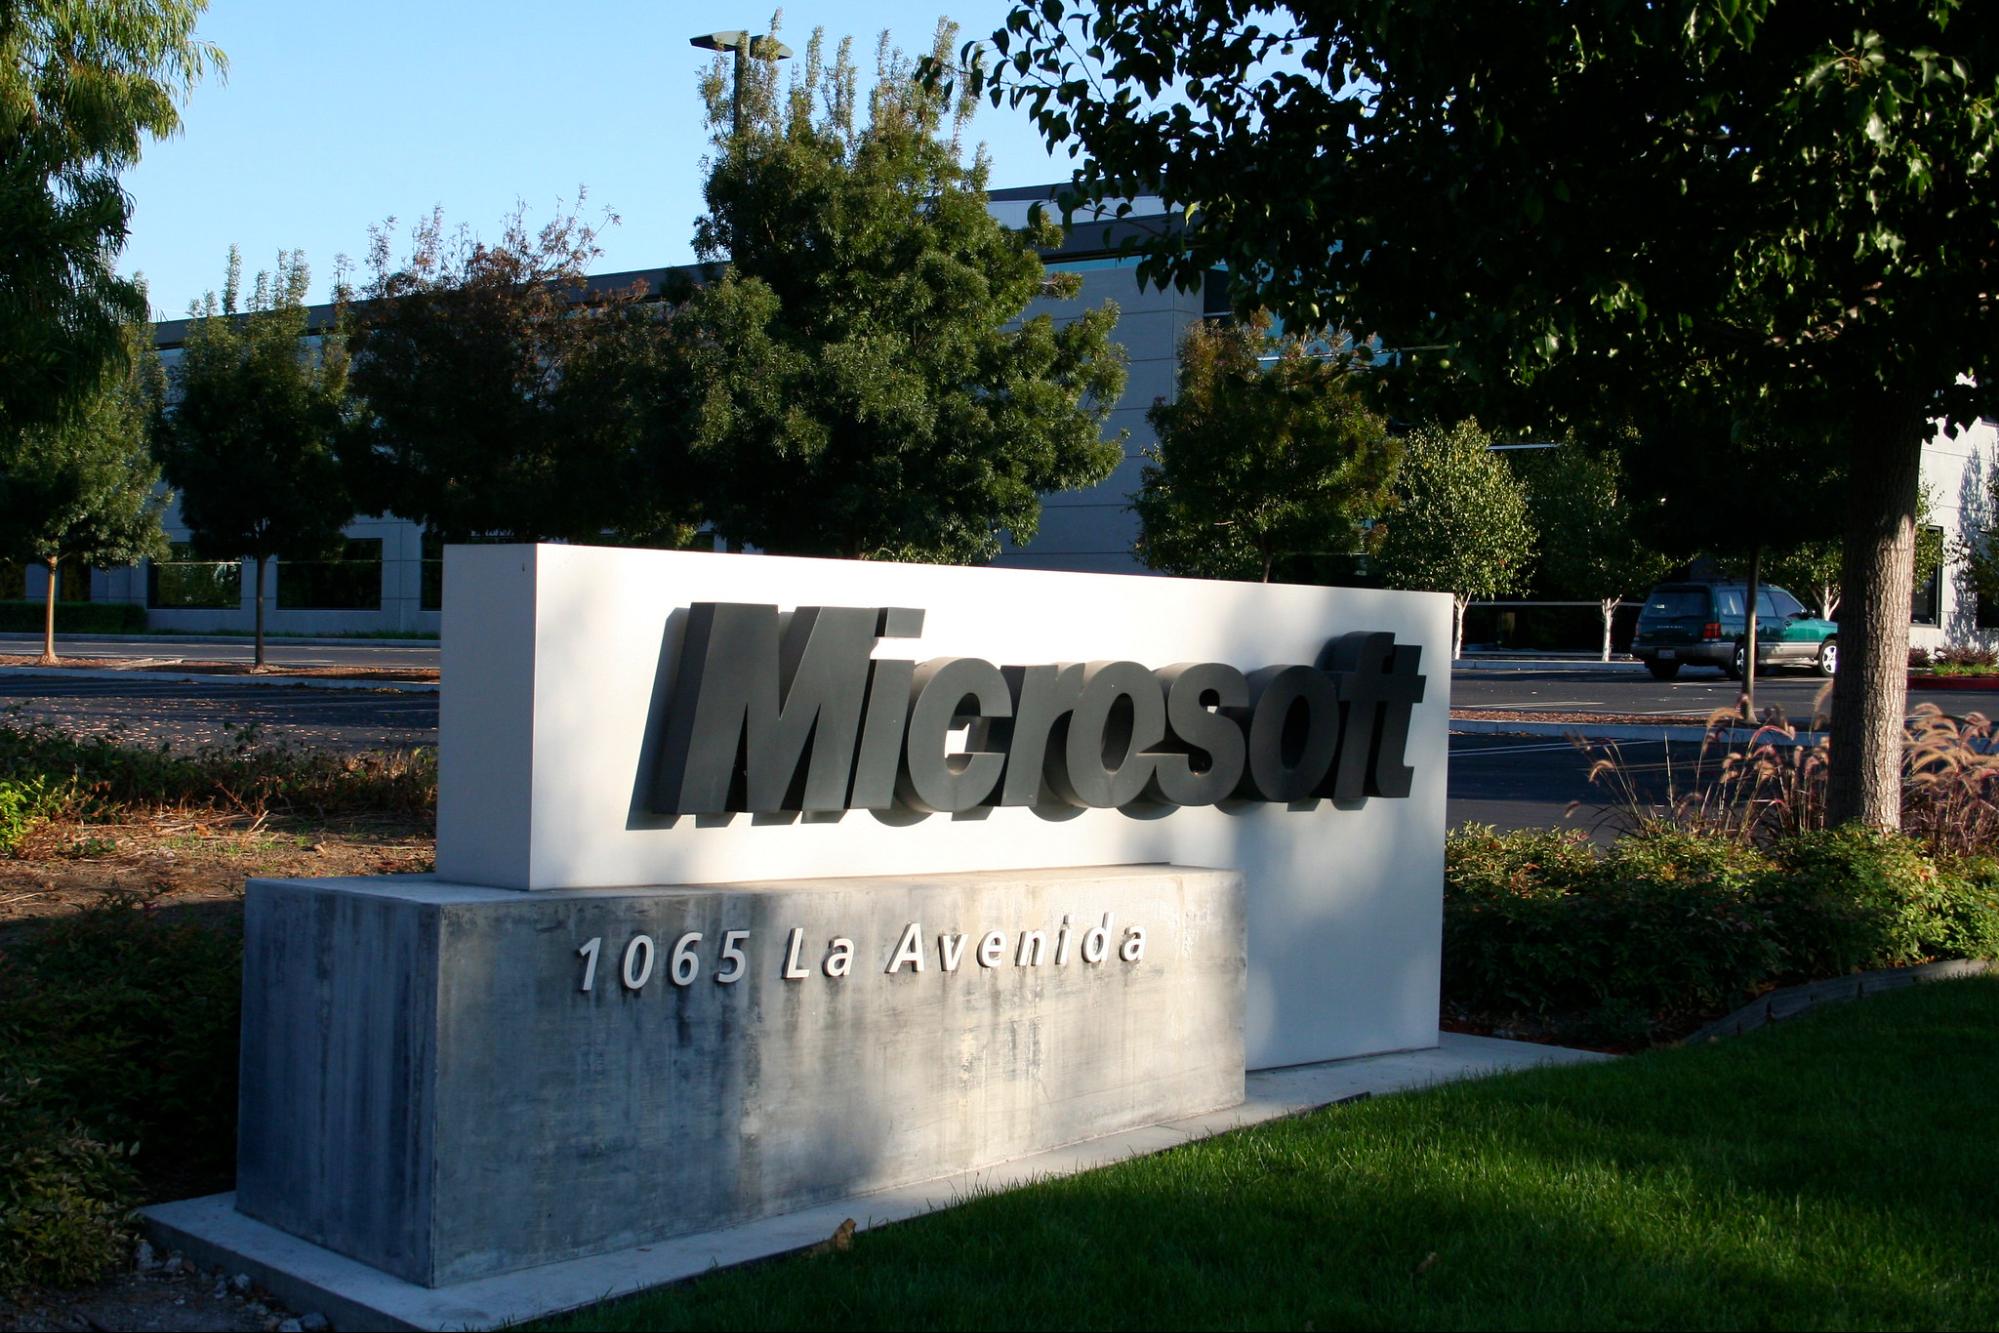 Job Cuts in Tech Sector Spread as Microsoft Lays Off 10,000